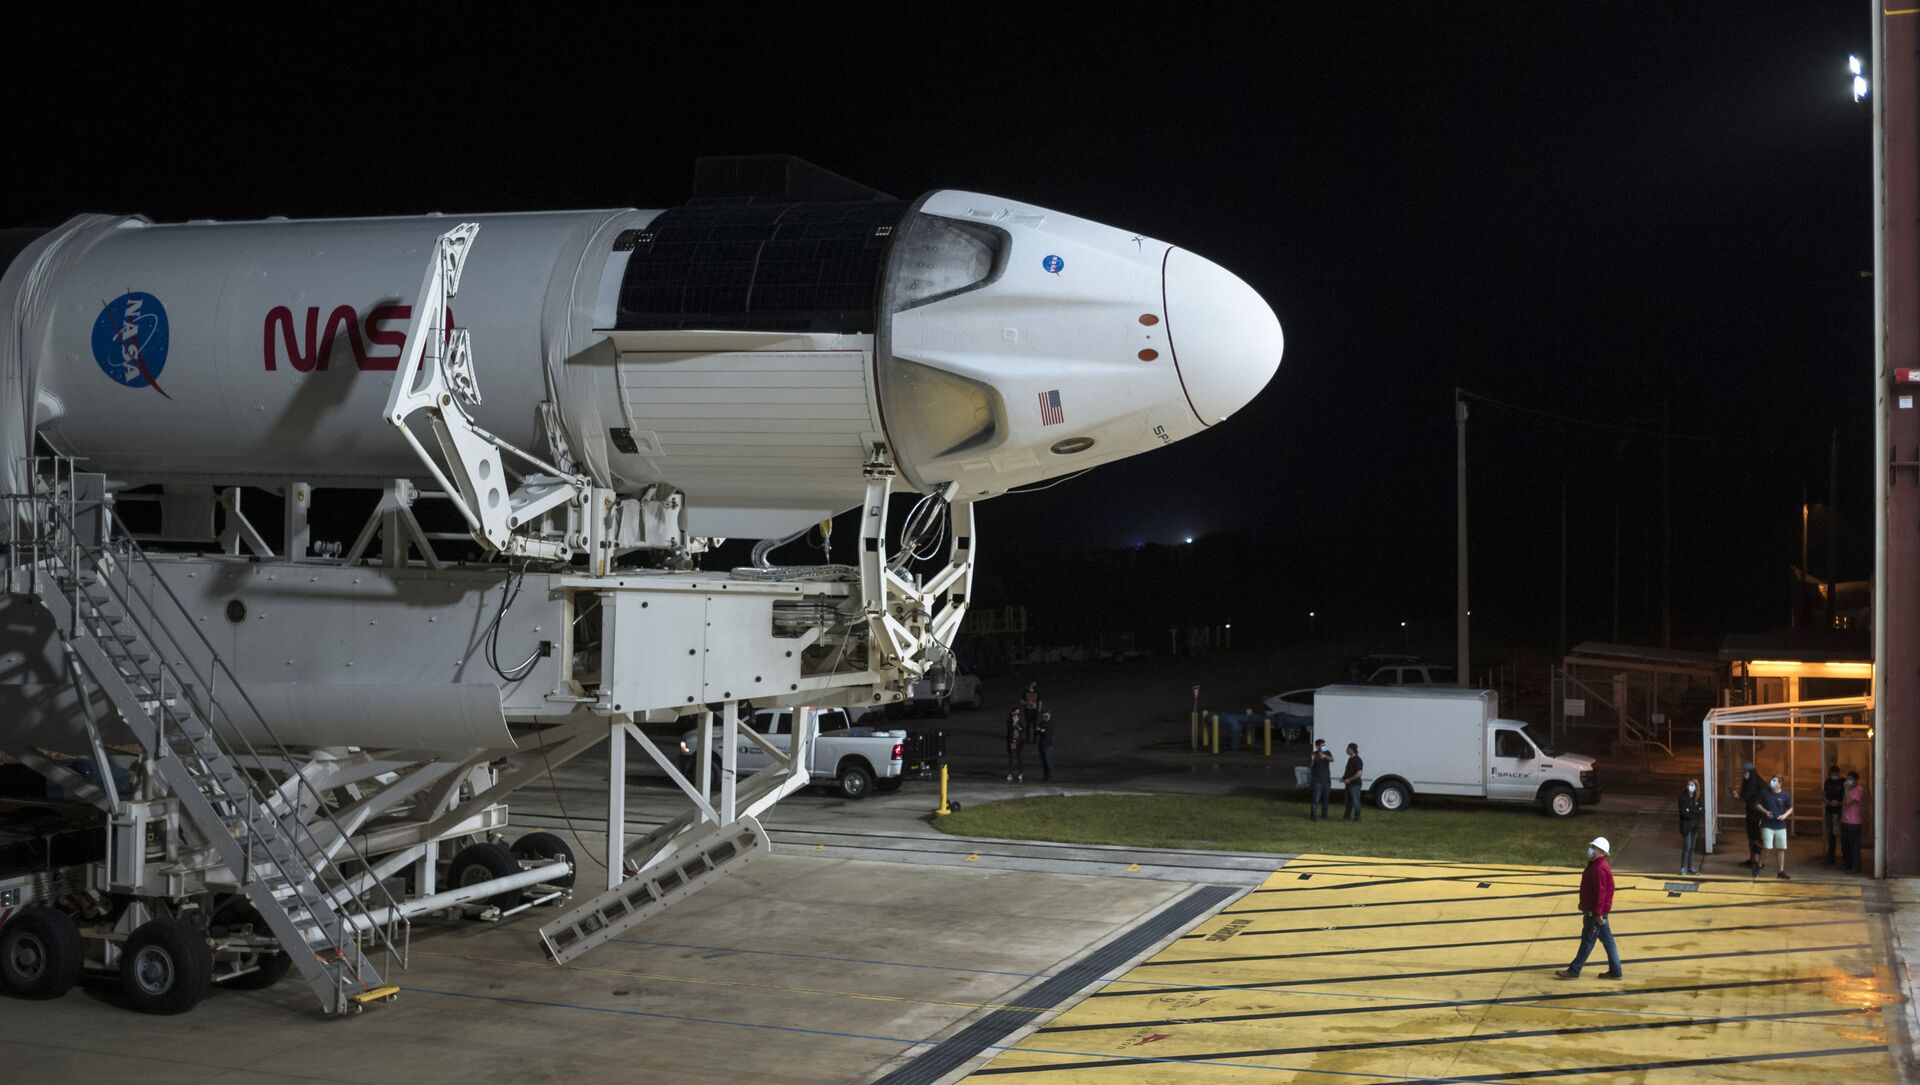 In this Monday, Nov. 9, 2020 photo provided by NASA, a SpaceX Falcon 9 rocket and Crew Dragon capsule is rolled out of the horizontal integration facility at Launch Complex 39A, as preparations continue for a crewed mission at NASA's Kennedy Space Center in Florida.  - Sputnik International, 1920, 04.05.2021